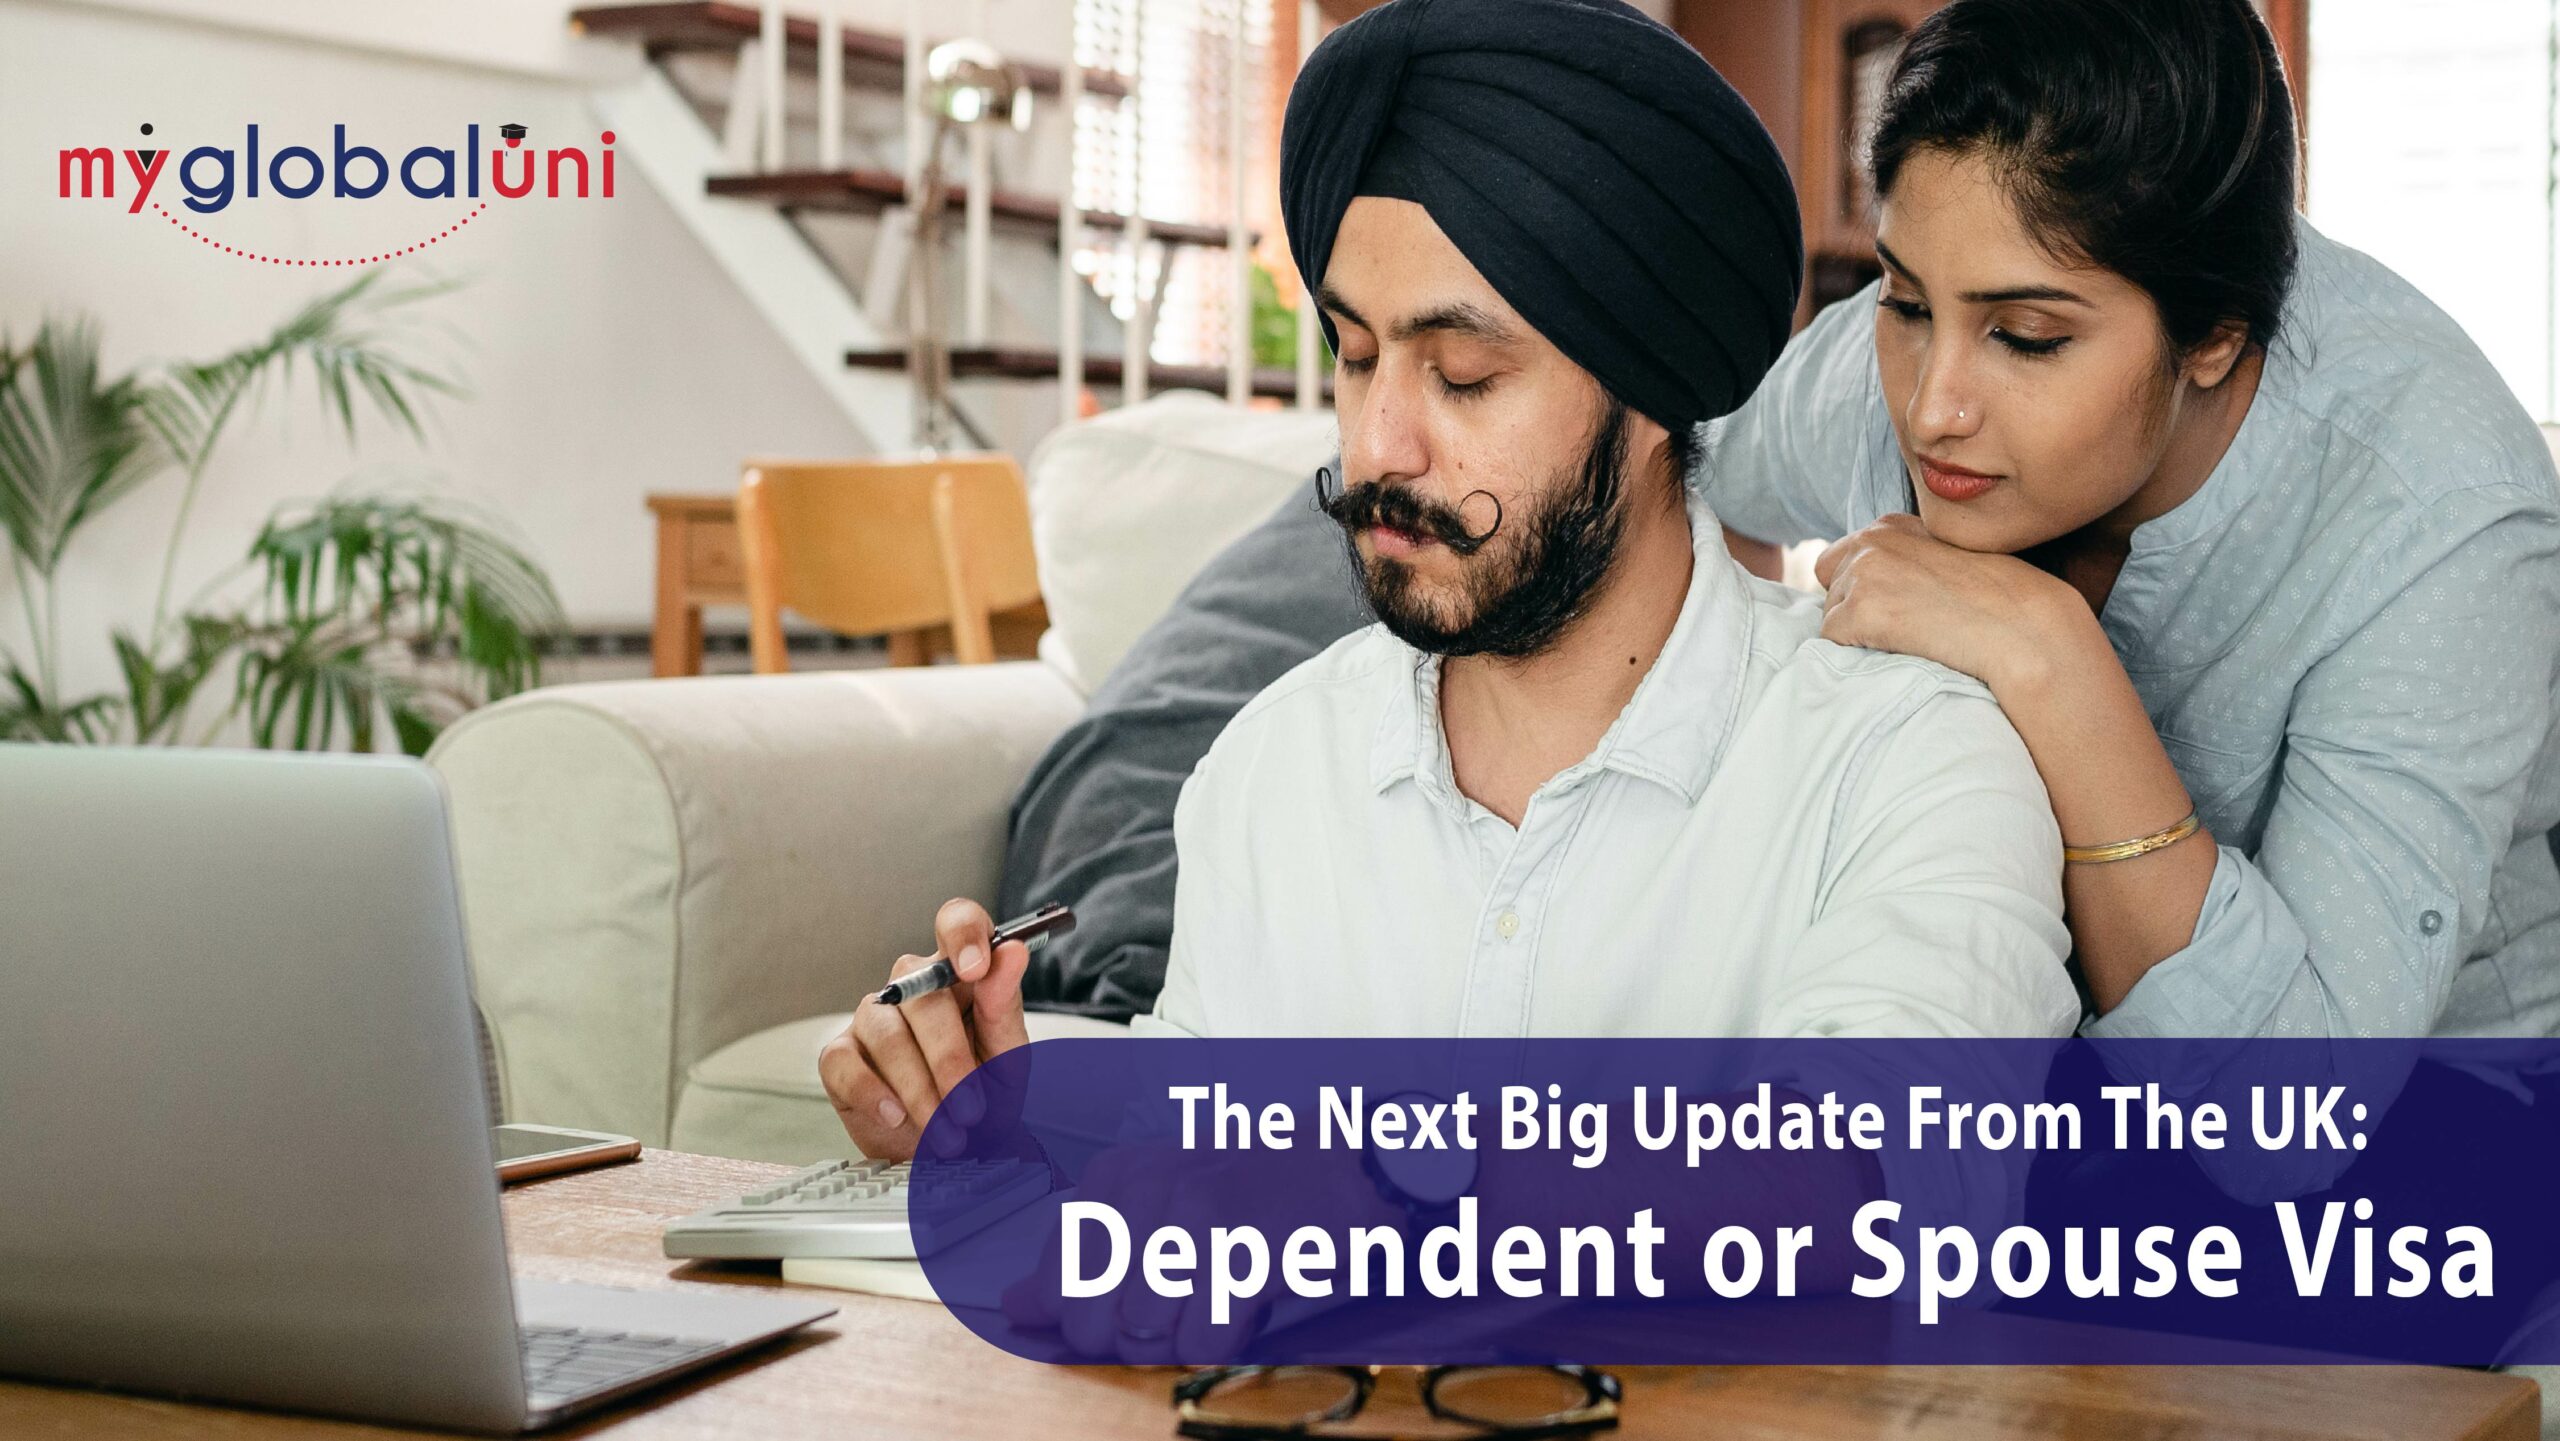 The Next Big Update from the UK: Dependent or Spouse Visa